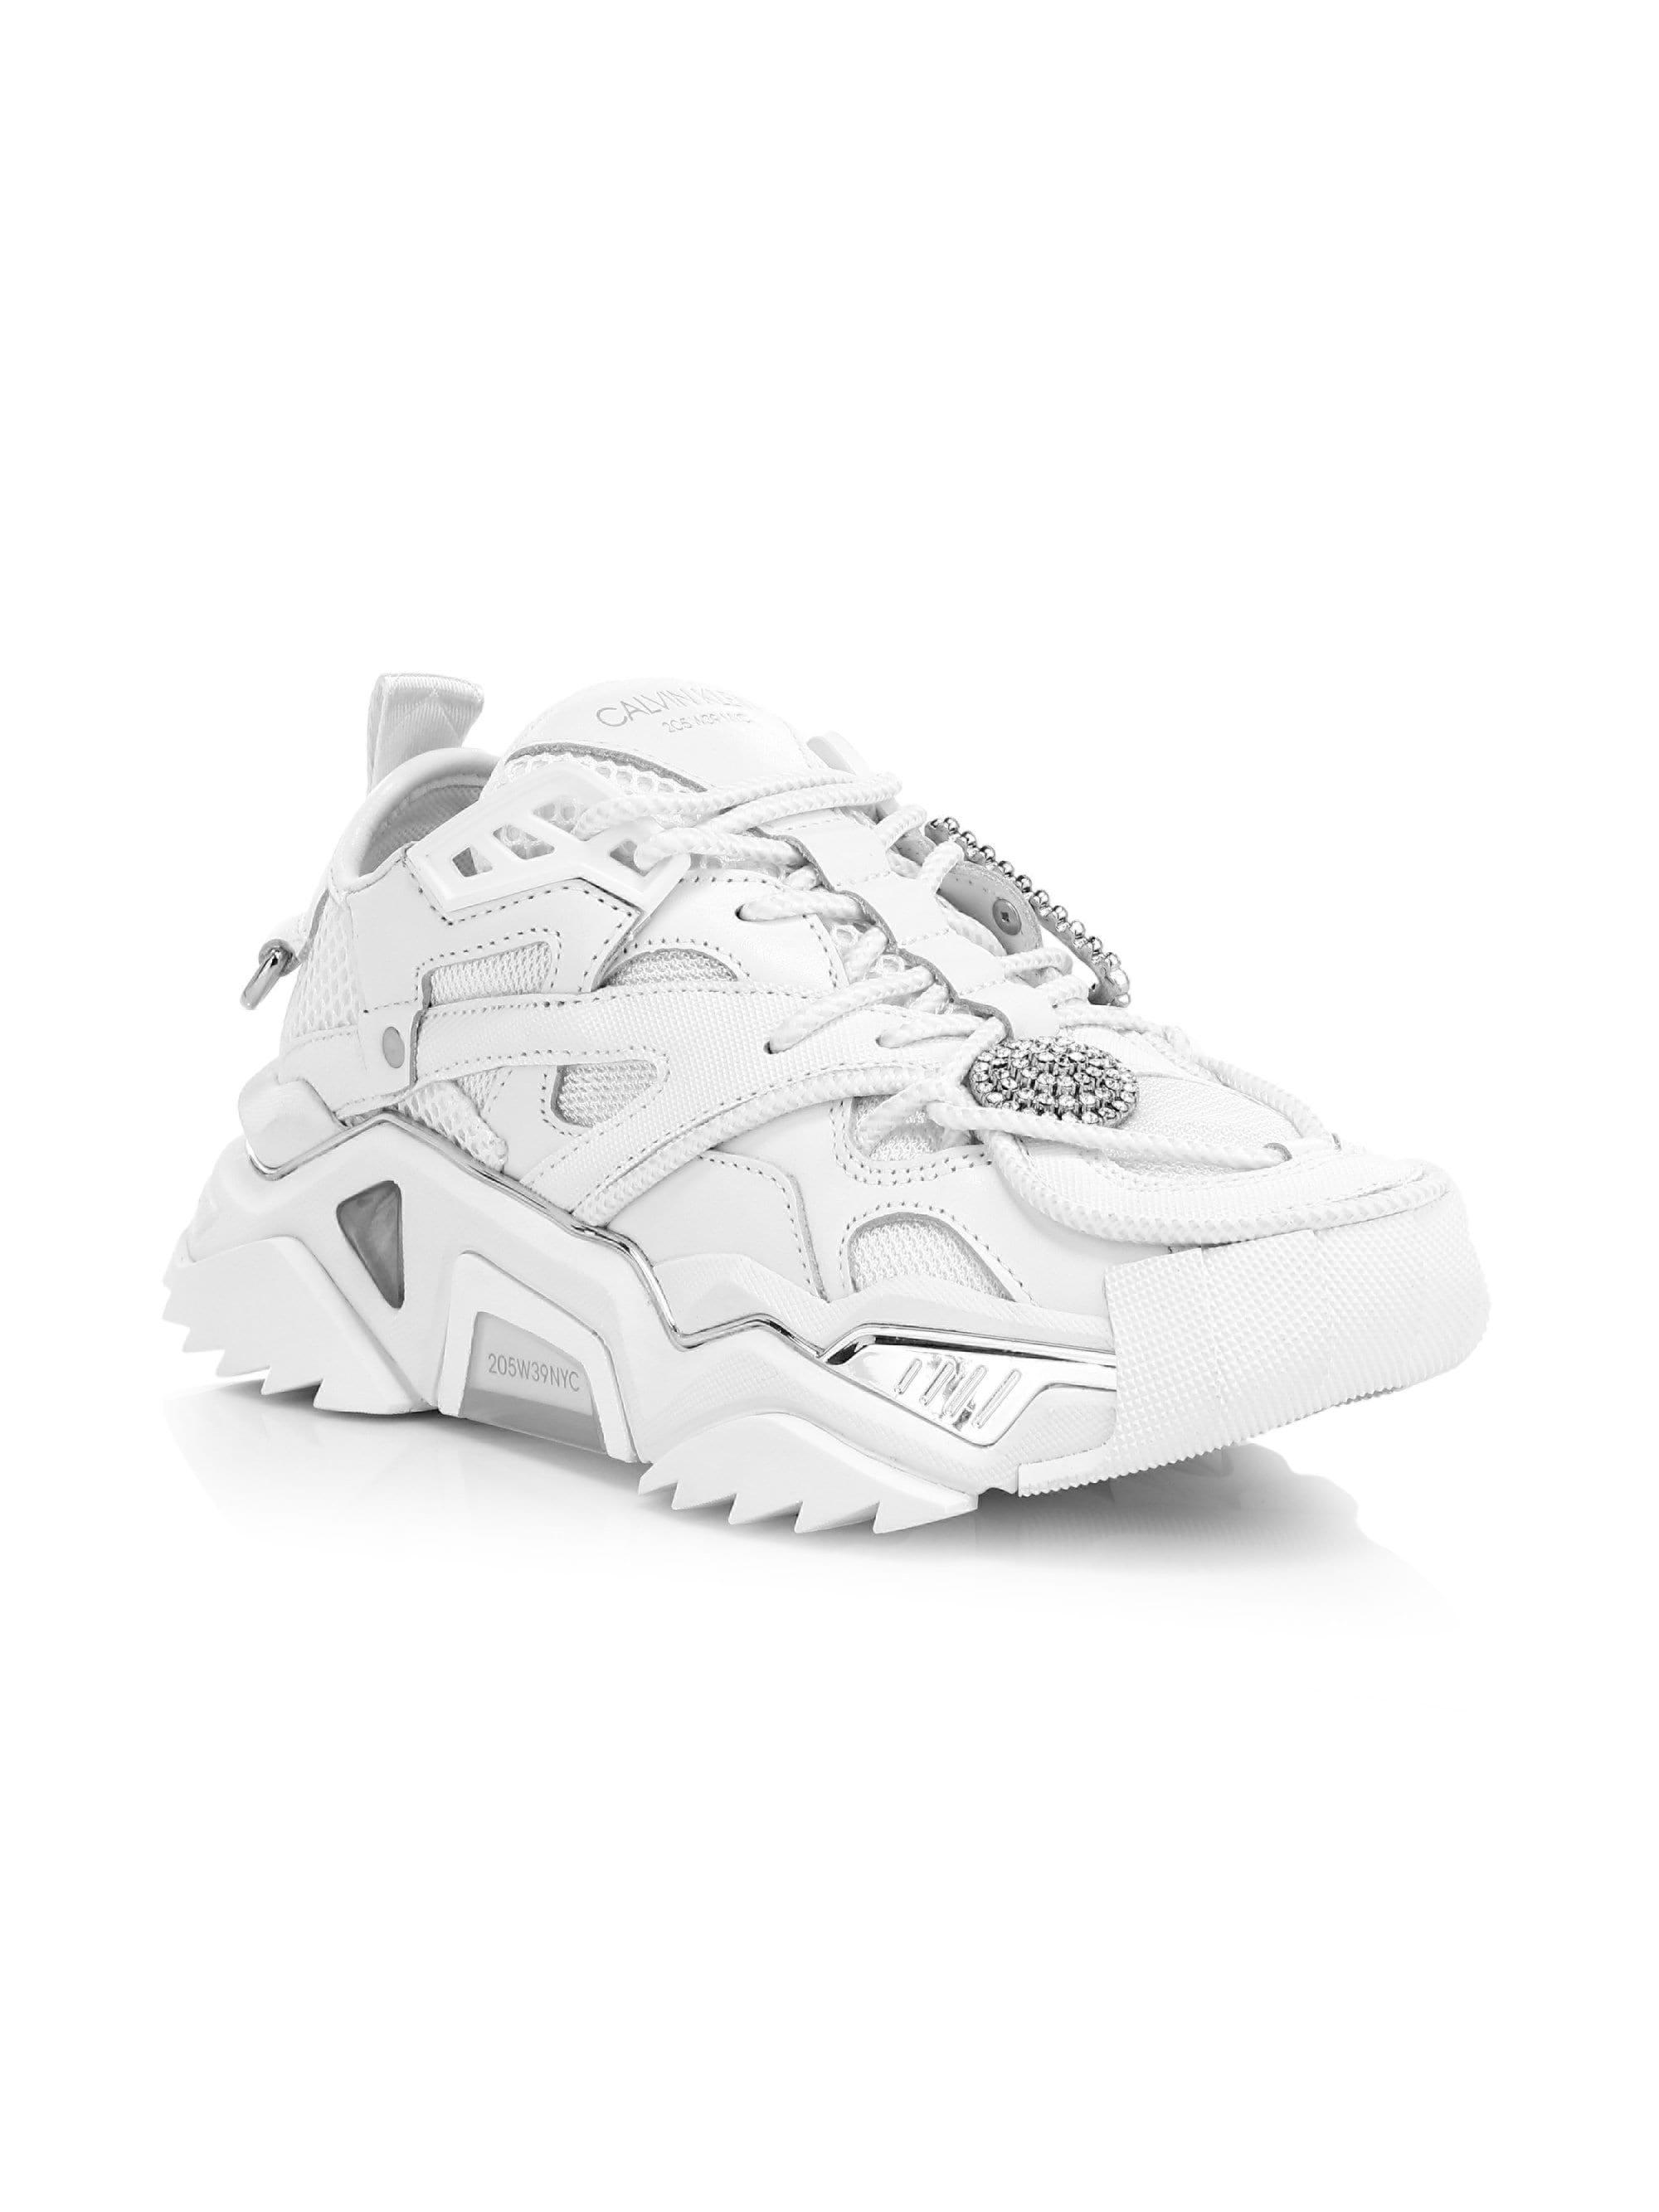 calvin klein sneakers 205 Cheaper Than Retail Price> Buy Clothing,  Accessories and lifestyle products for women & men -